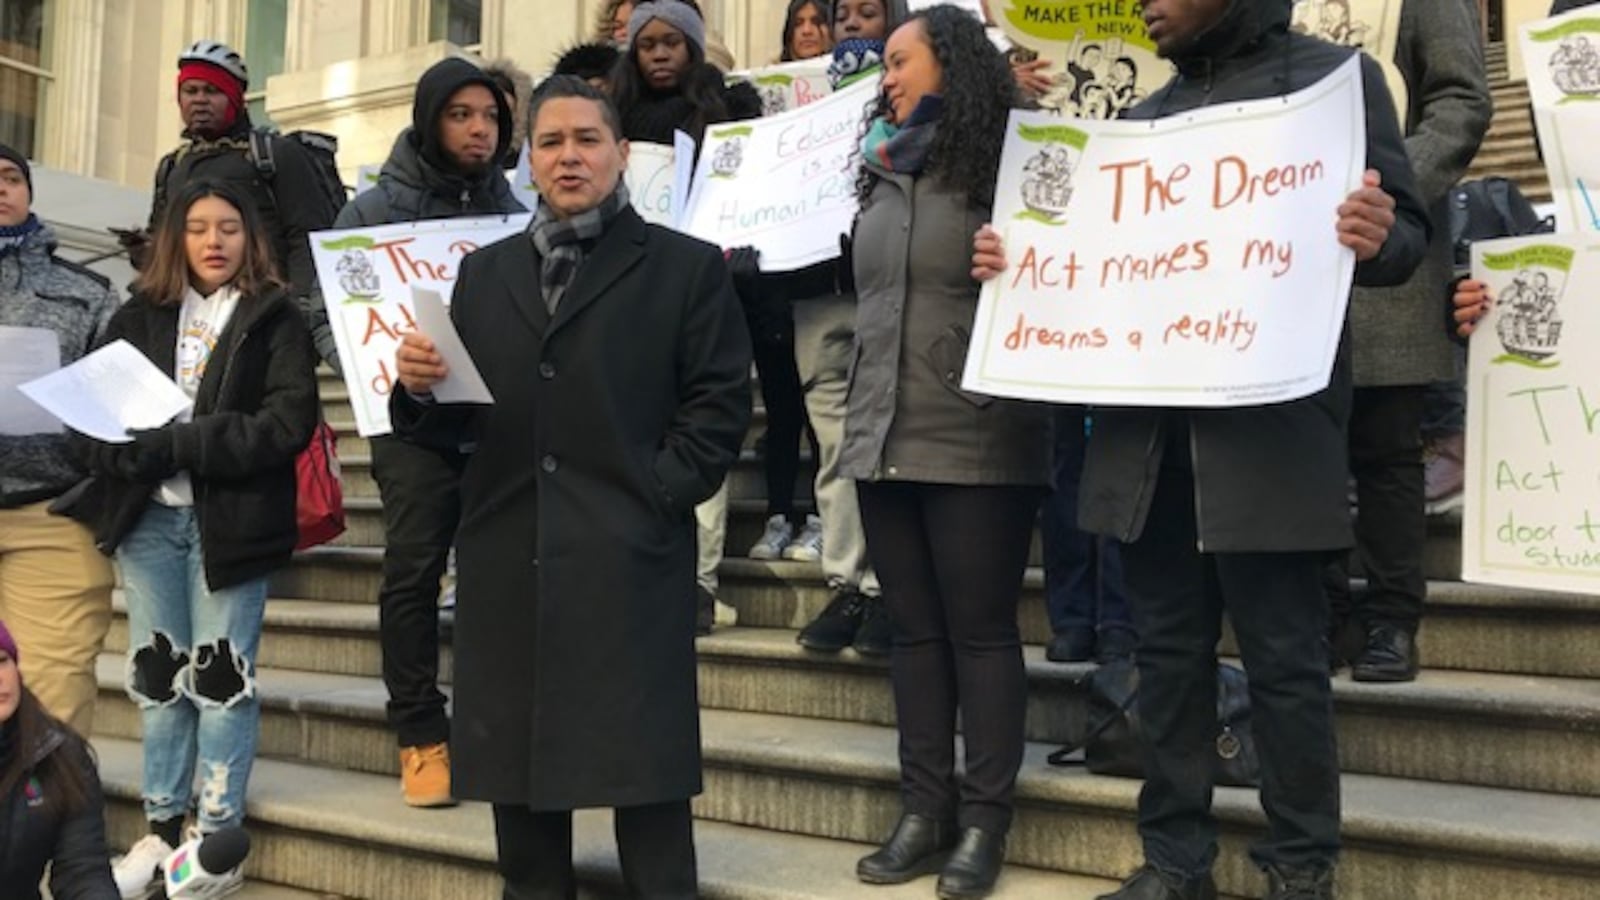 Chancellor Richard Carranza talks during a rally pushing for more awareness around the DREAM Act, held by members of immigration advocacy organization Make The Road New York.